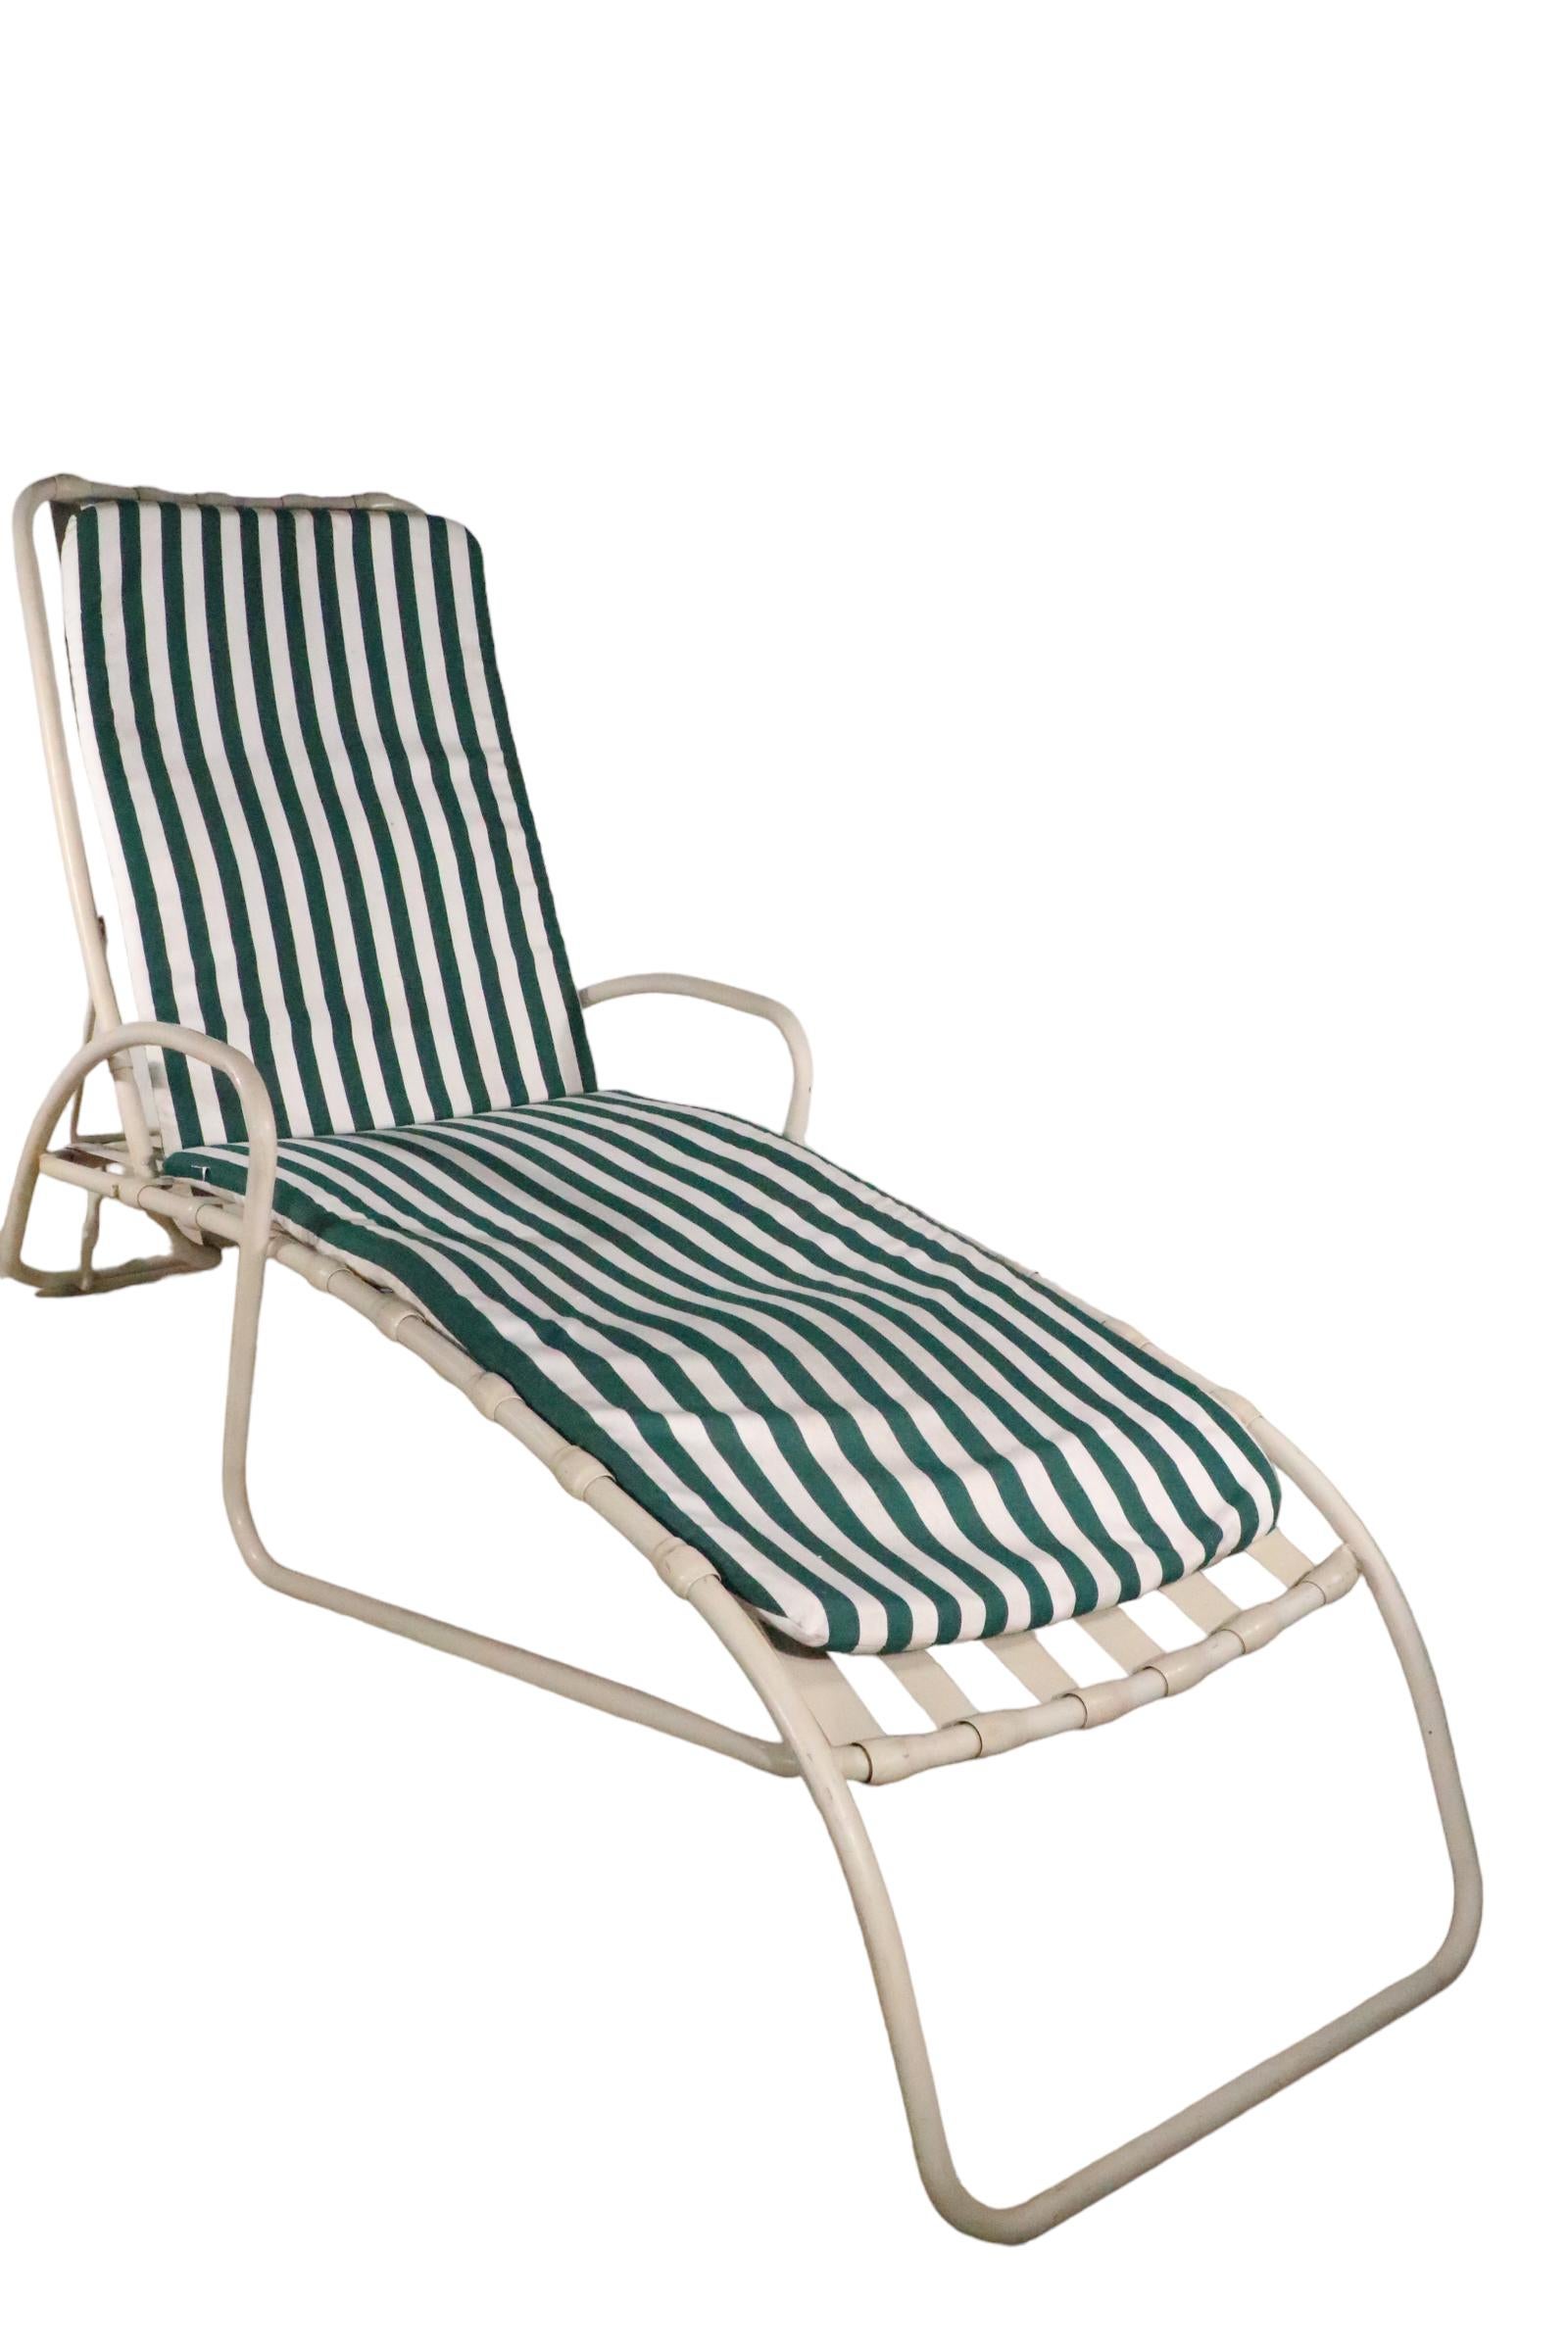 American Vintage Patio Poolside Garden  Brown Jordan Reclining Chaise Lounge  For Sale